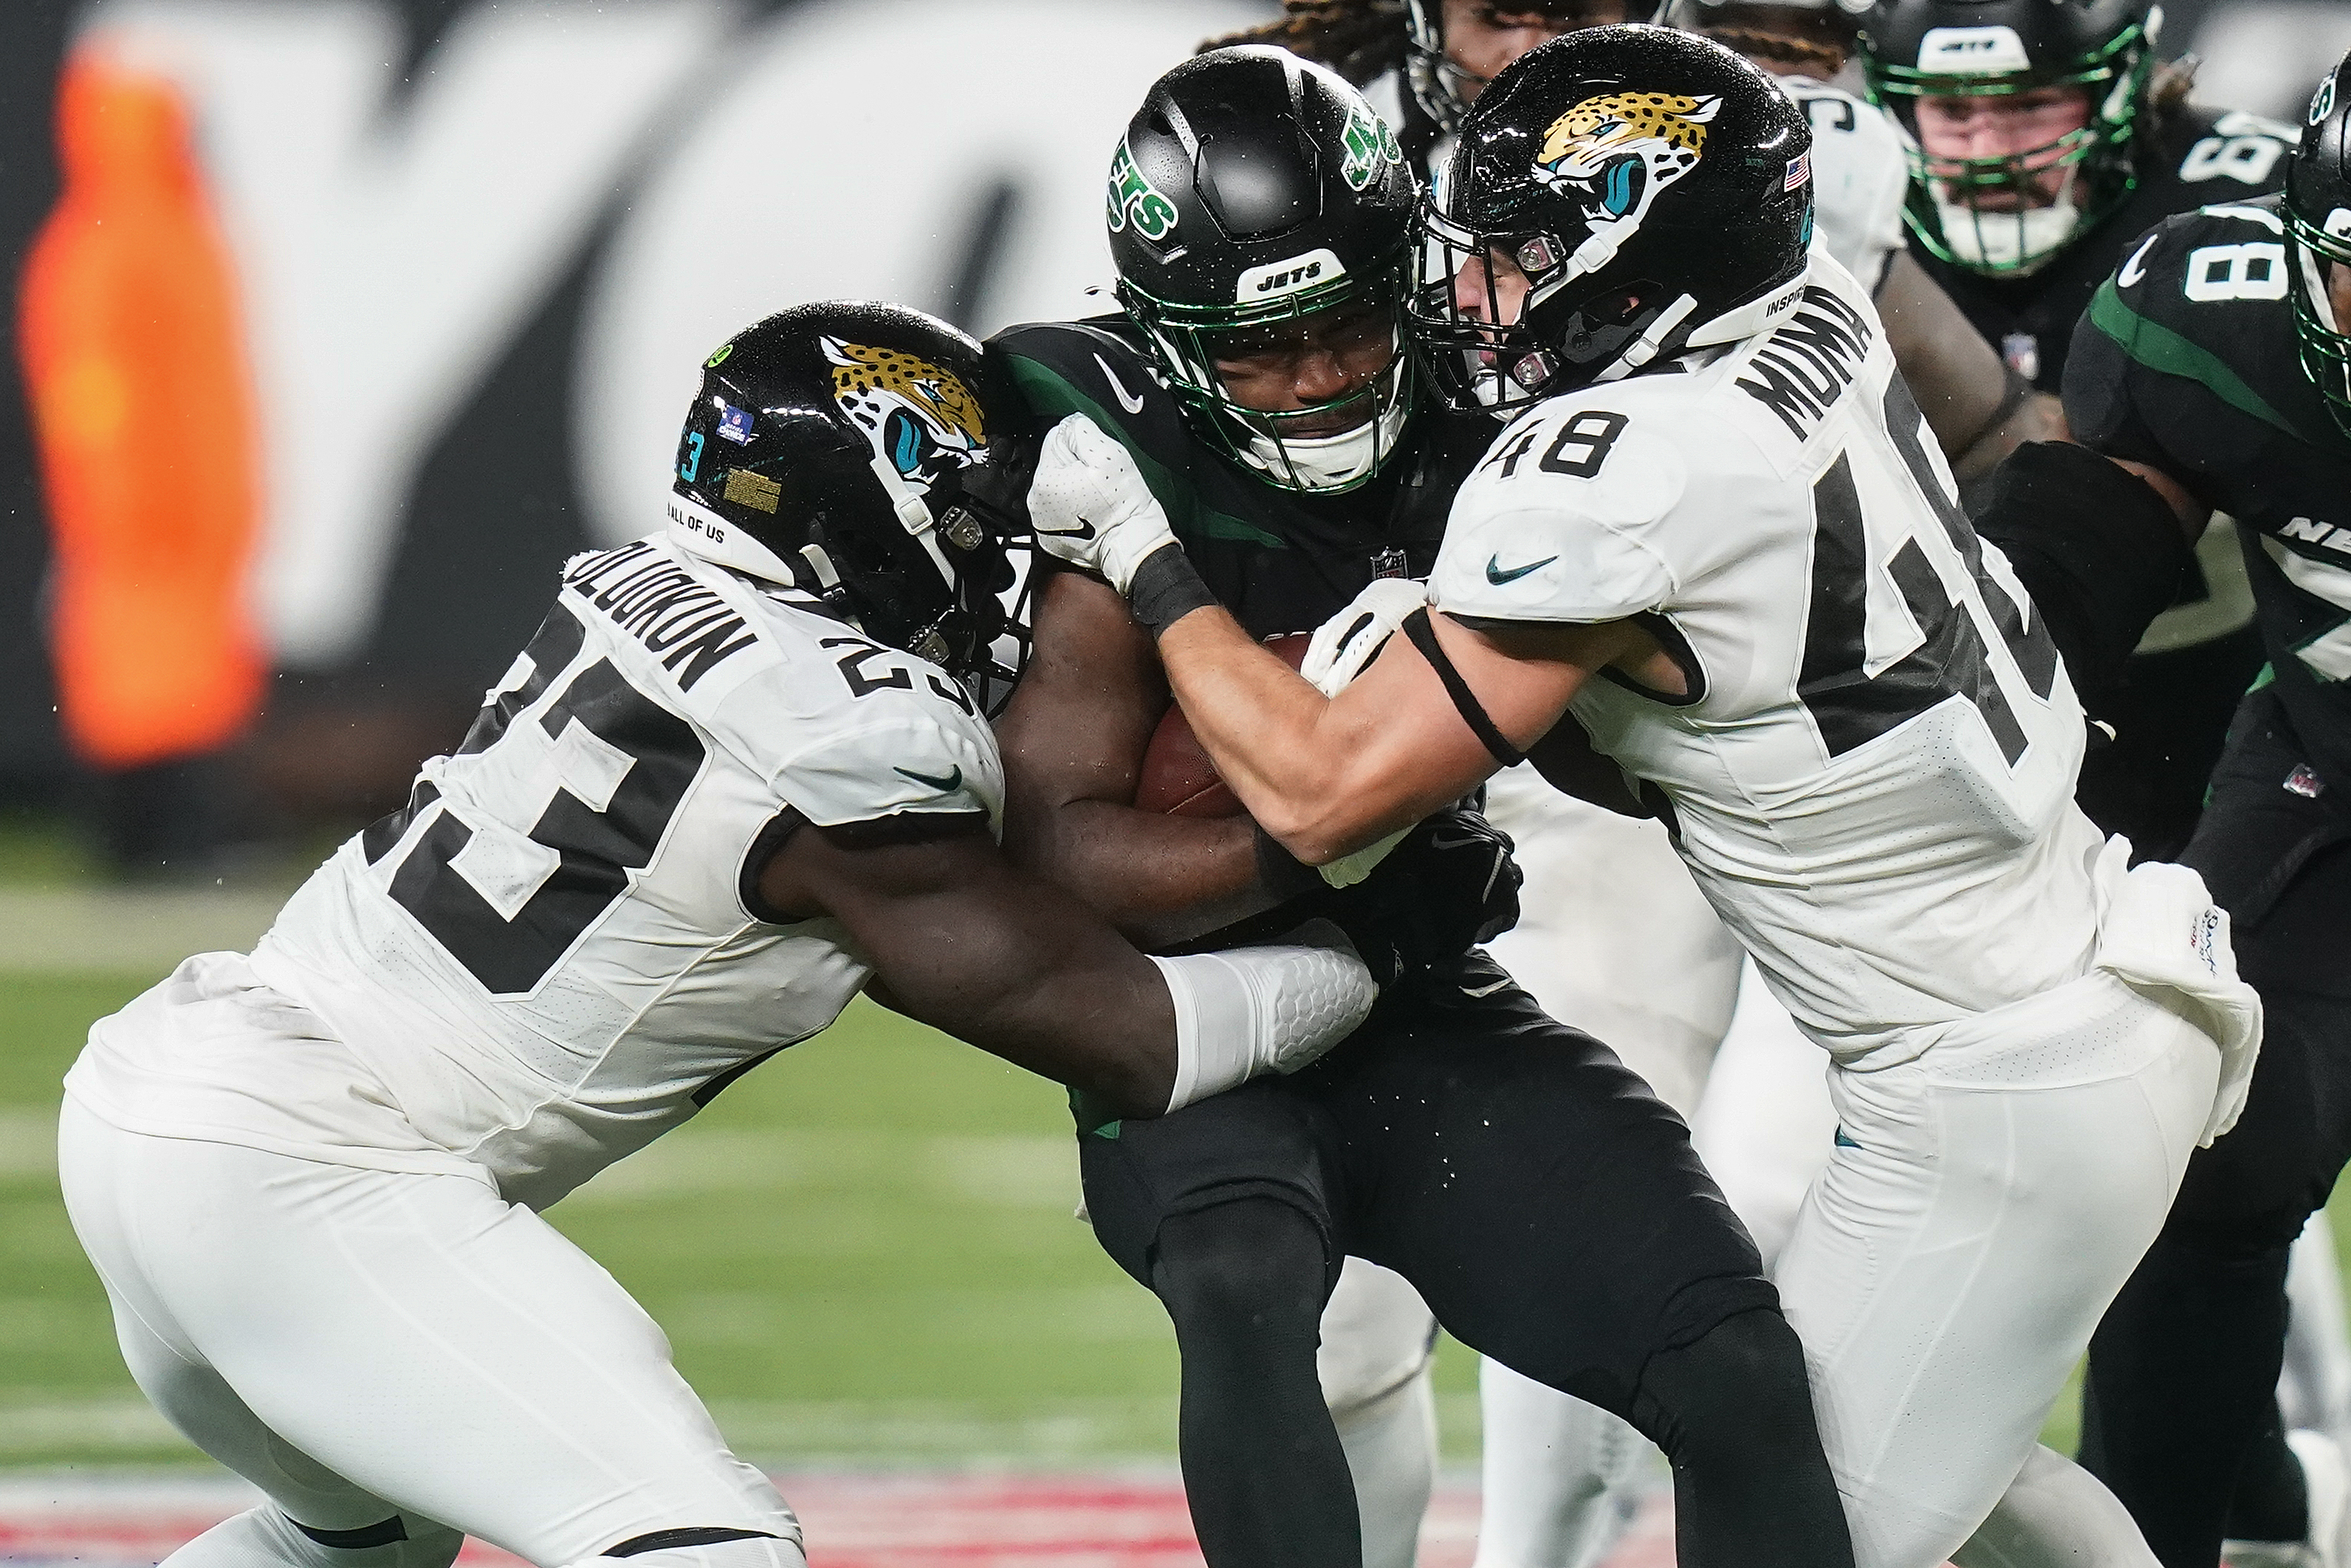 Lawrence, Jaguars continue playoff push, outclass Jets 19-3